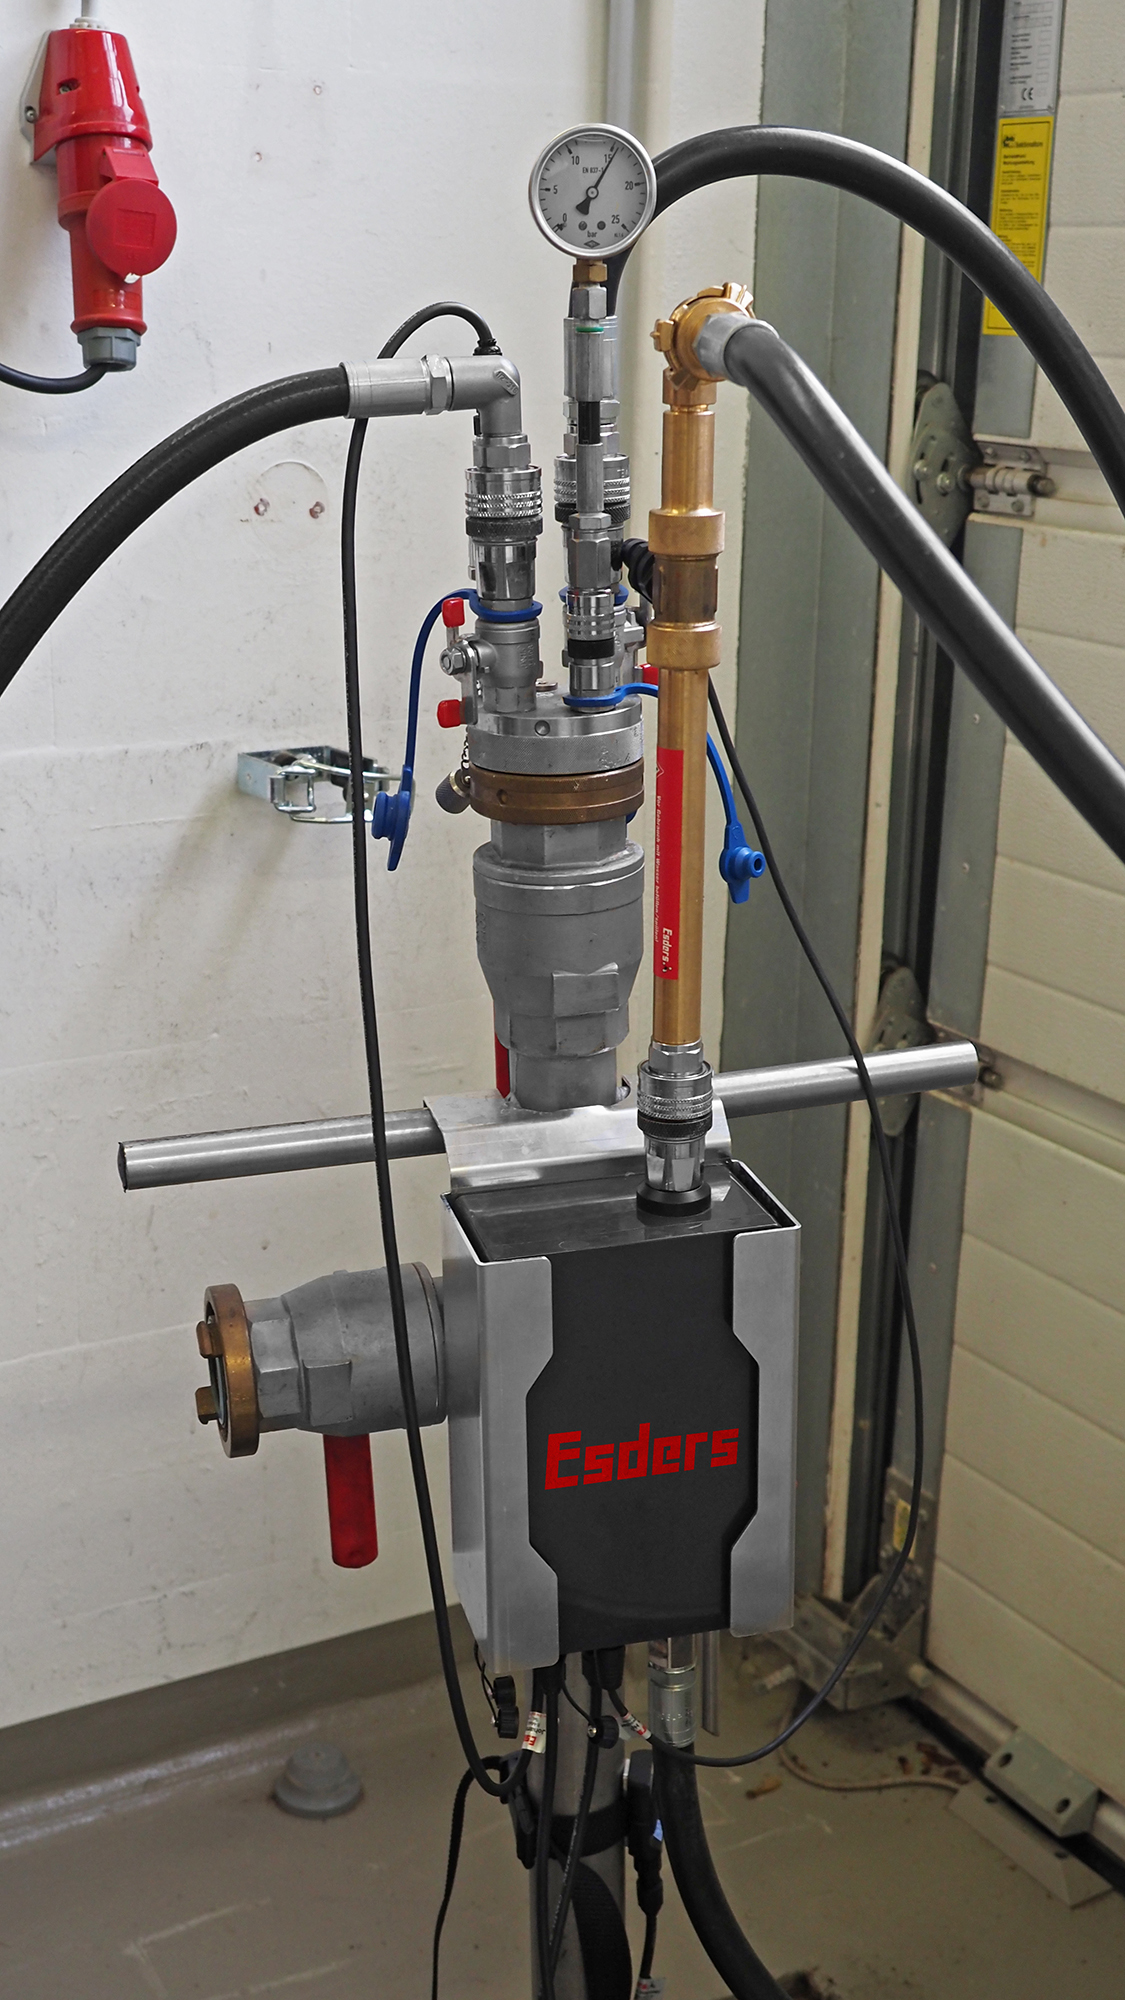 Automatic water drain equipment for pressure testing